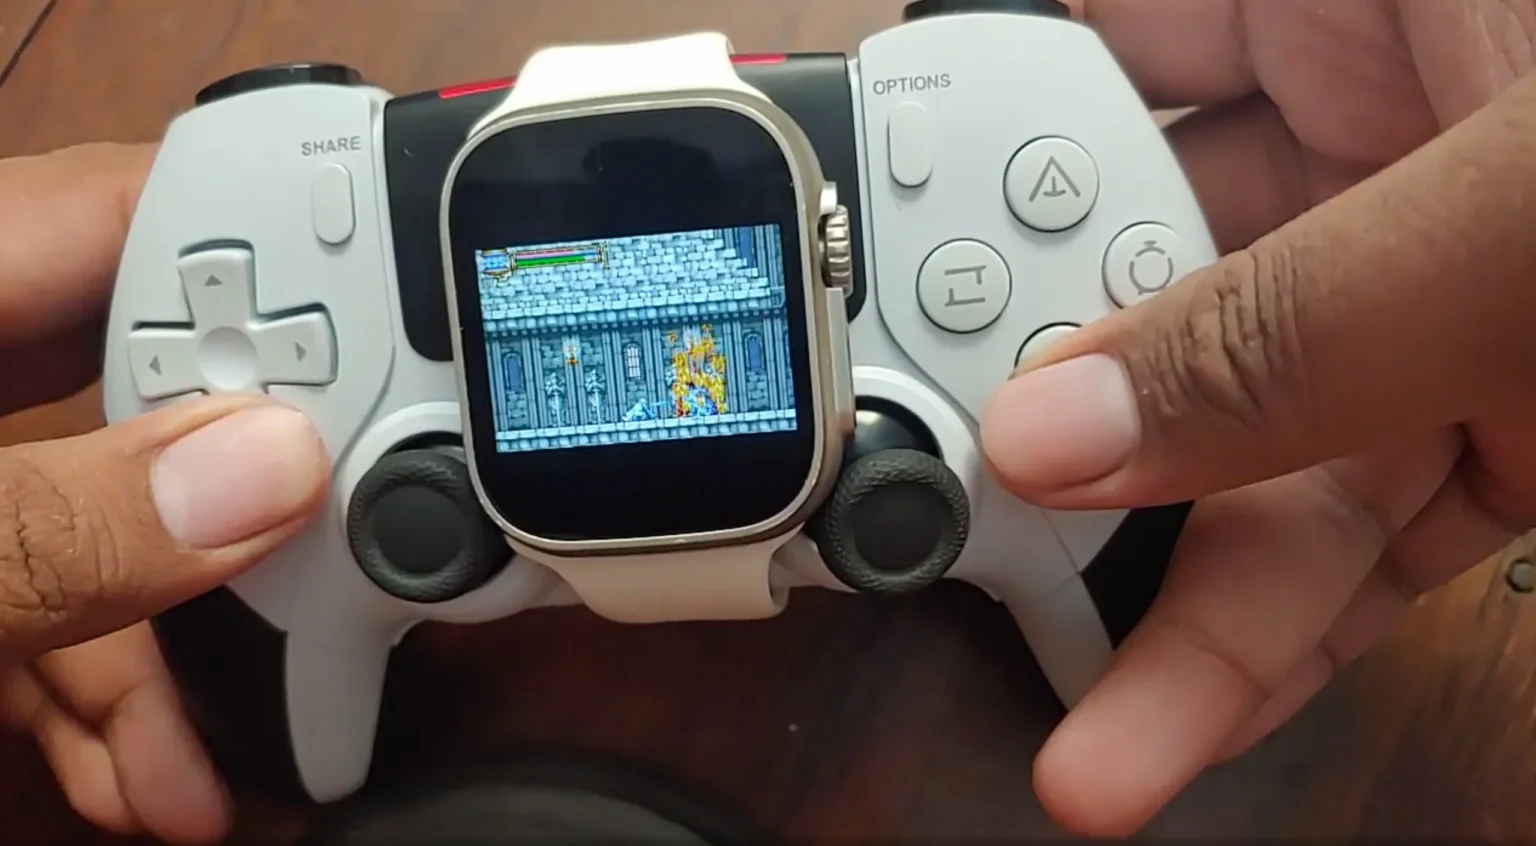 Check out this Apple Watch running Android for gaming purposes